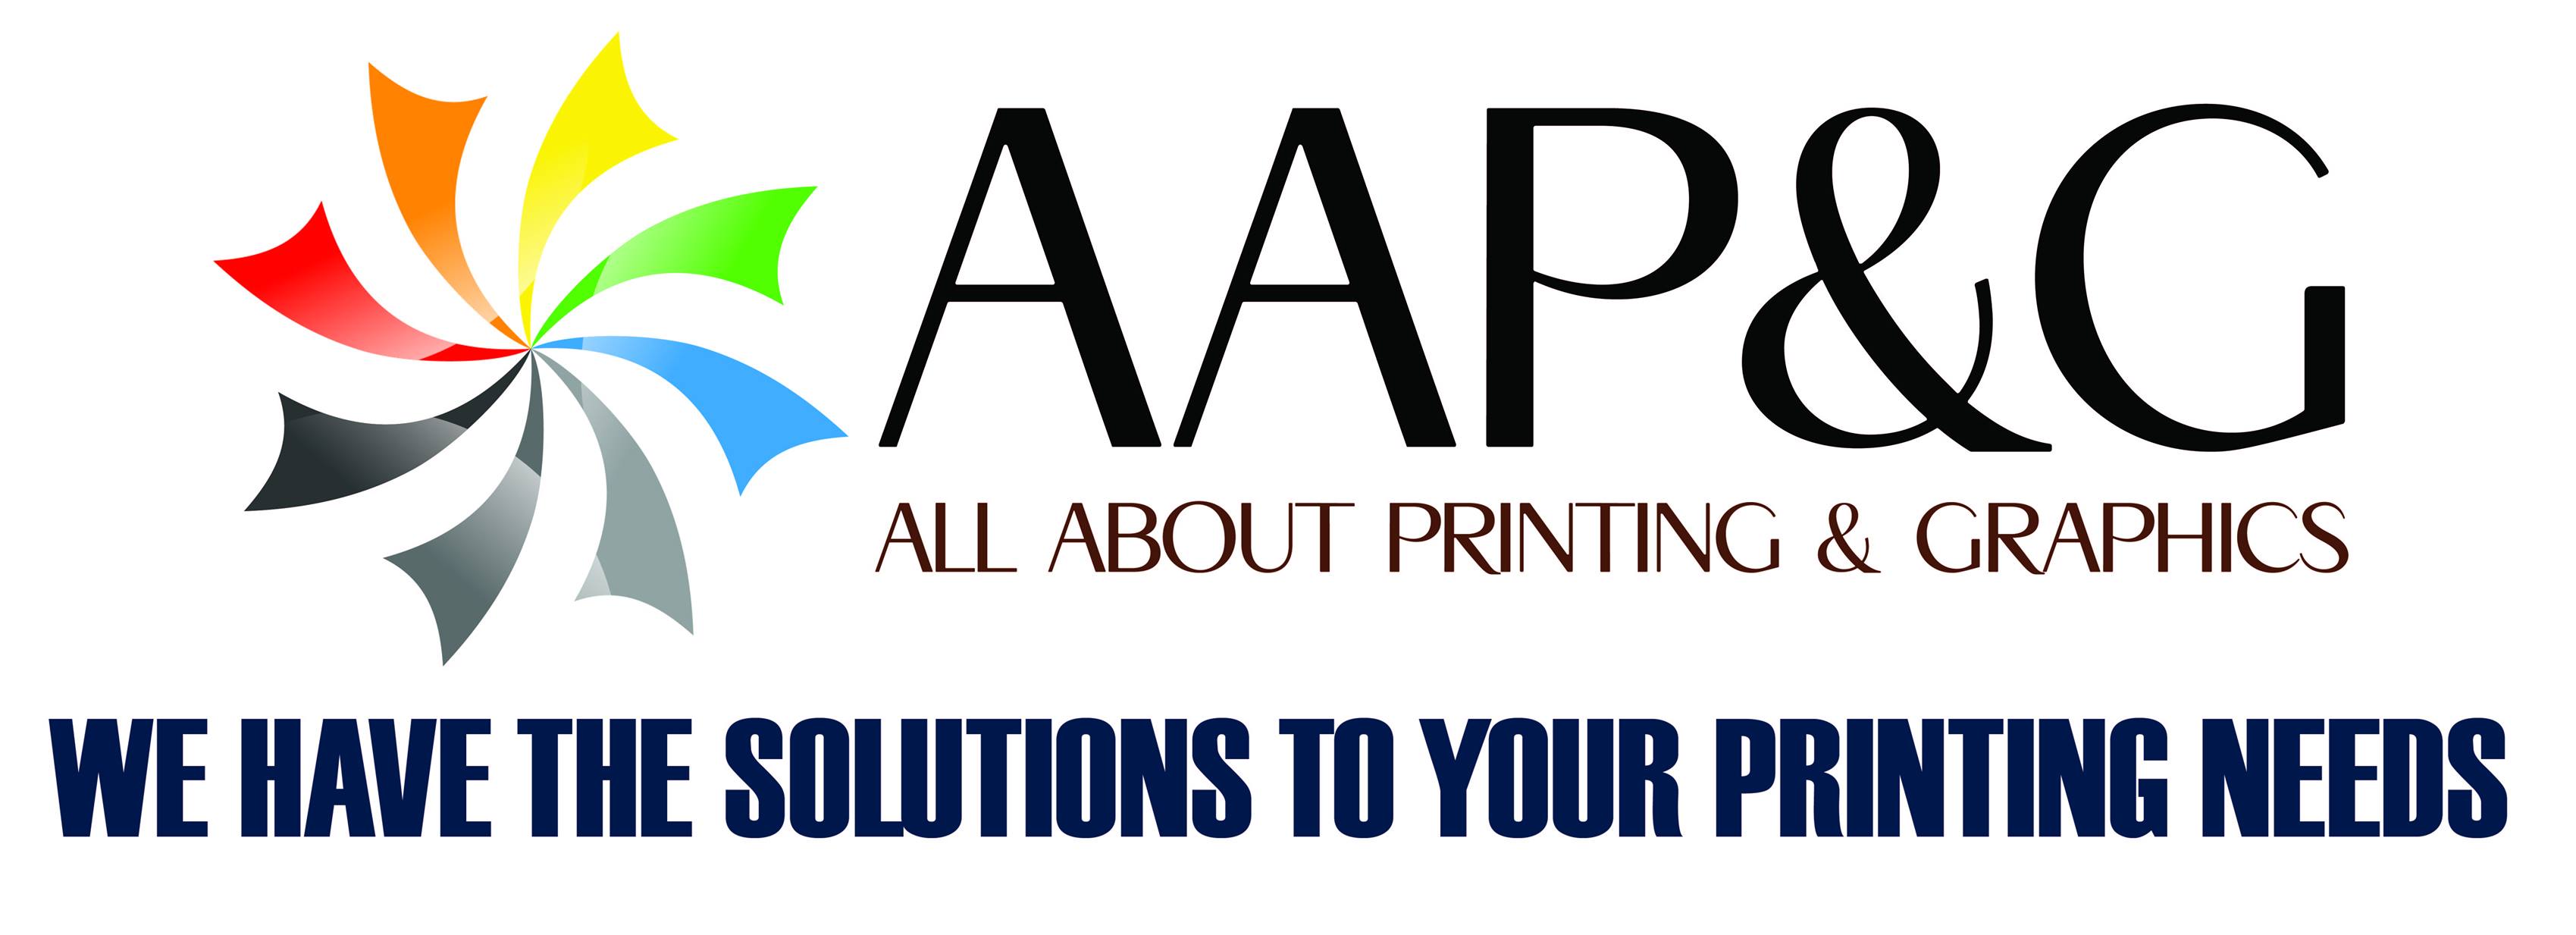 All About Printing & Graphics